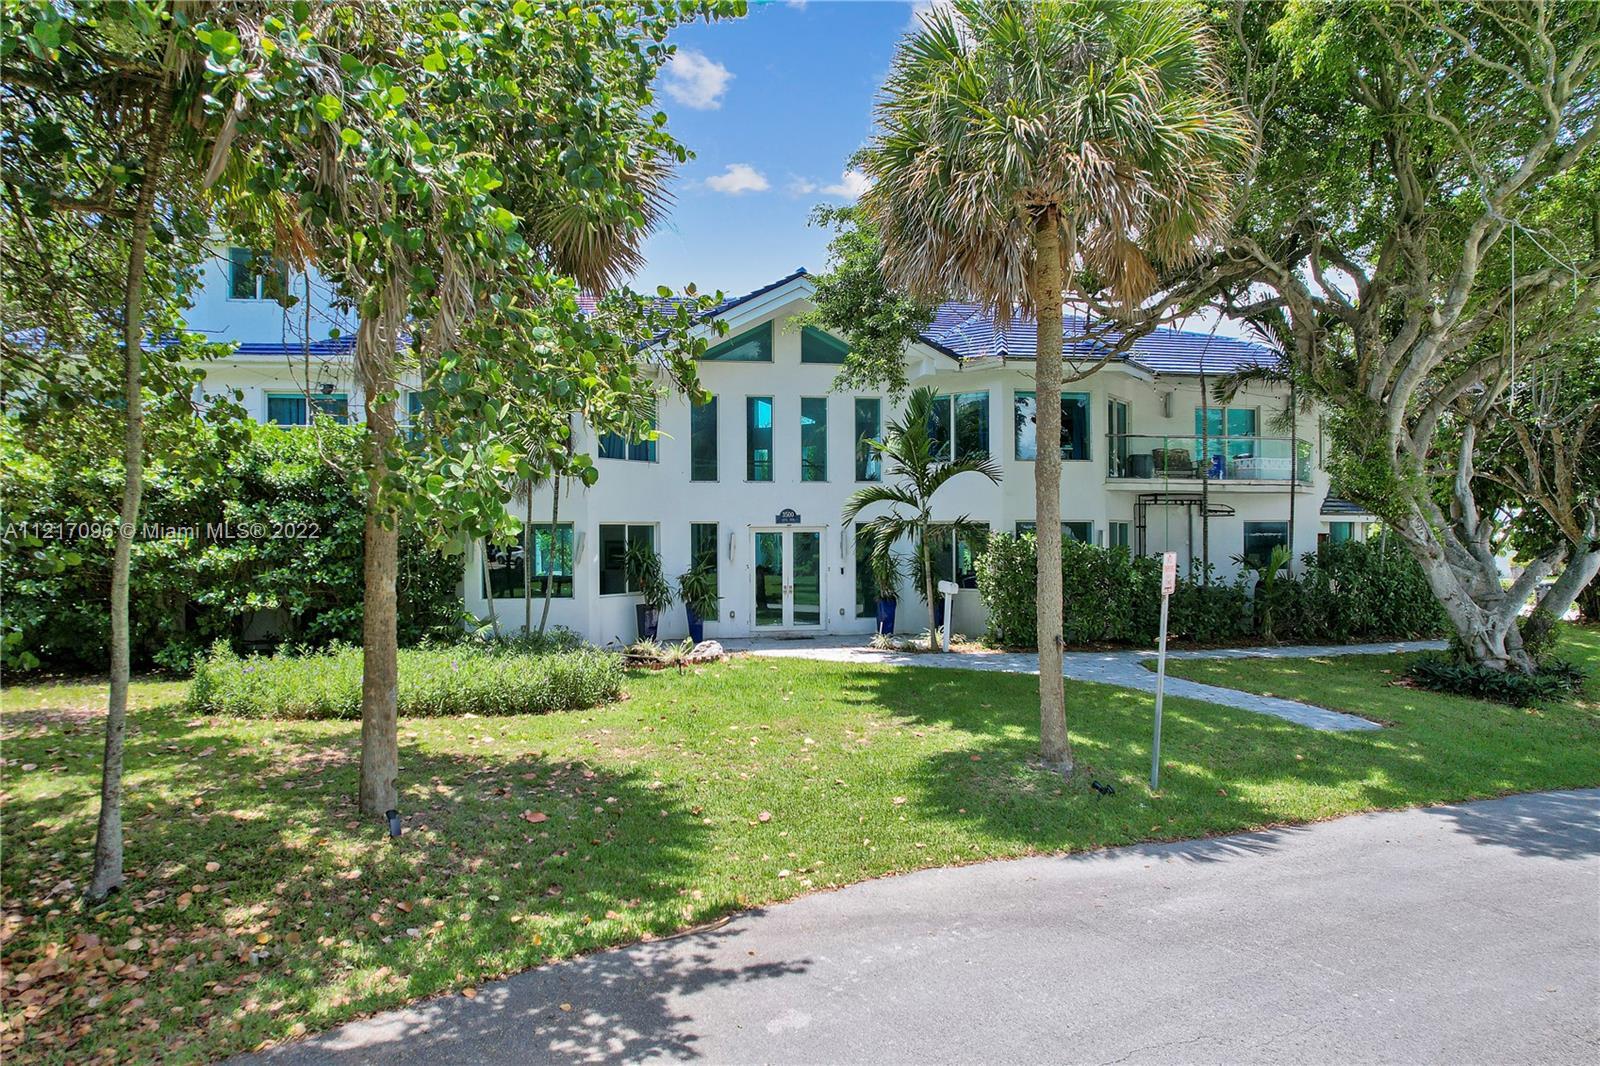 Just a short walk to the sparkling blue Atlantic Ocean, this 5-bedroom, 6 1/2-bathroom home is the i